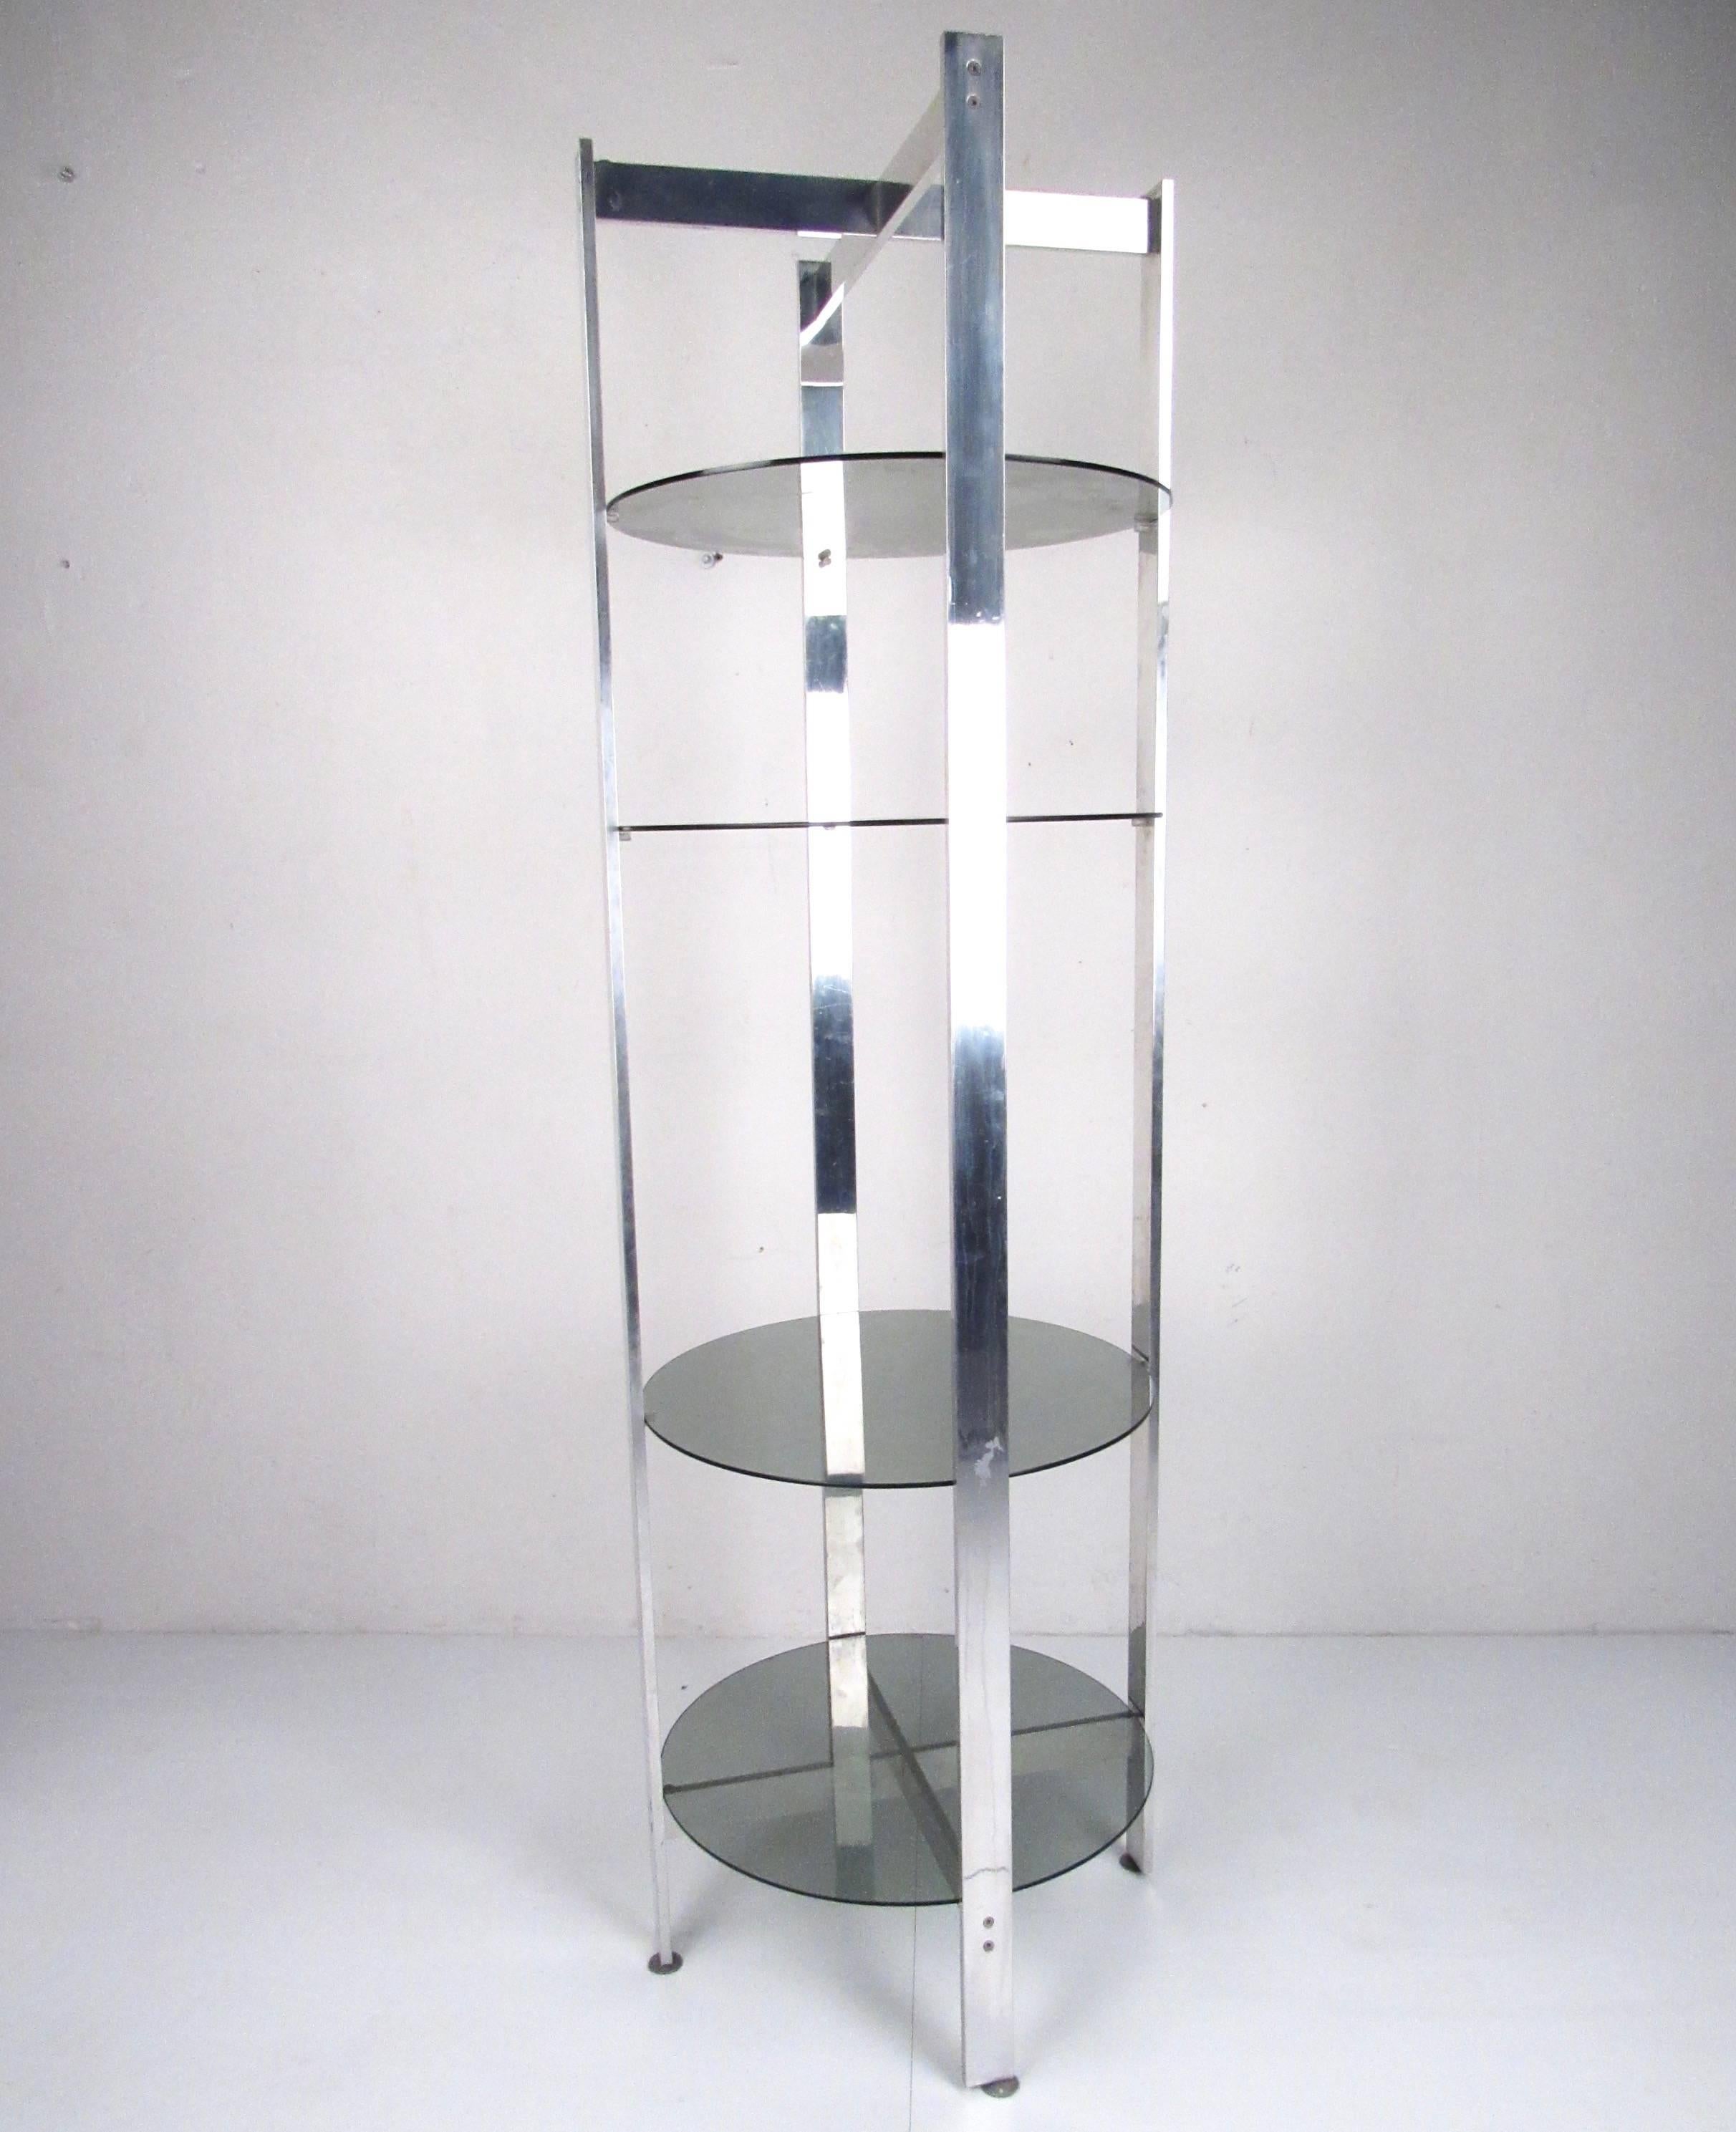 This stylish Mid-Century Modern shelf unit includes smoked glass shelves in an x-style frame, ideal for shop or home display. Vintage display étagère makes a striking modern addition to any interior. Please confirm item location (NY or NJ).